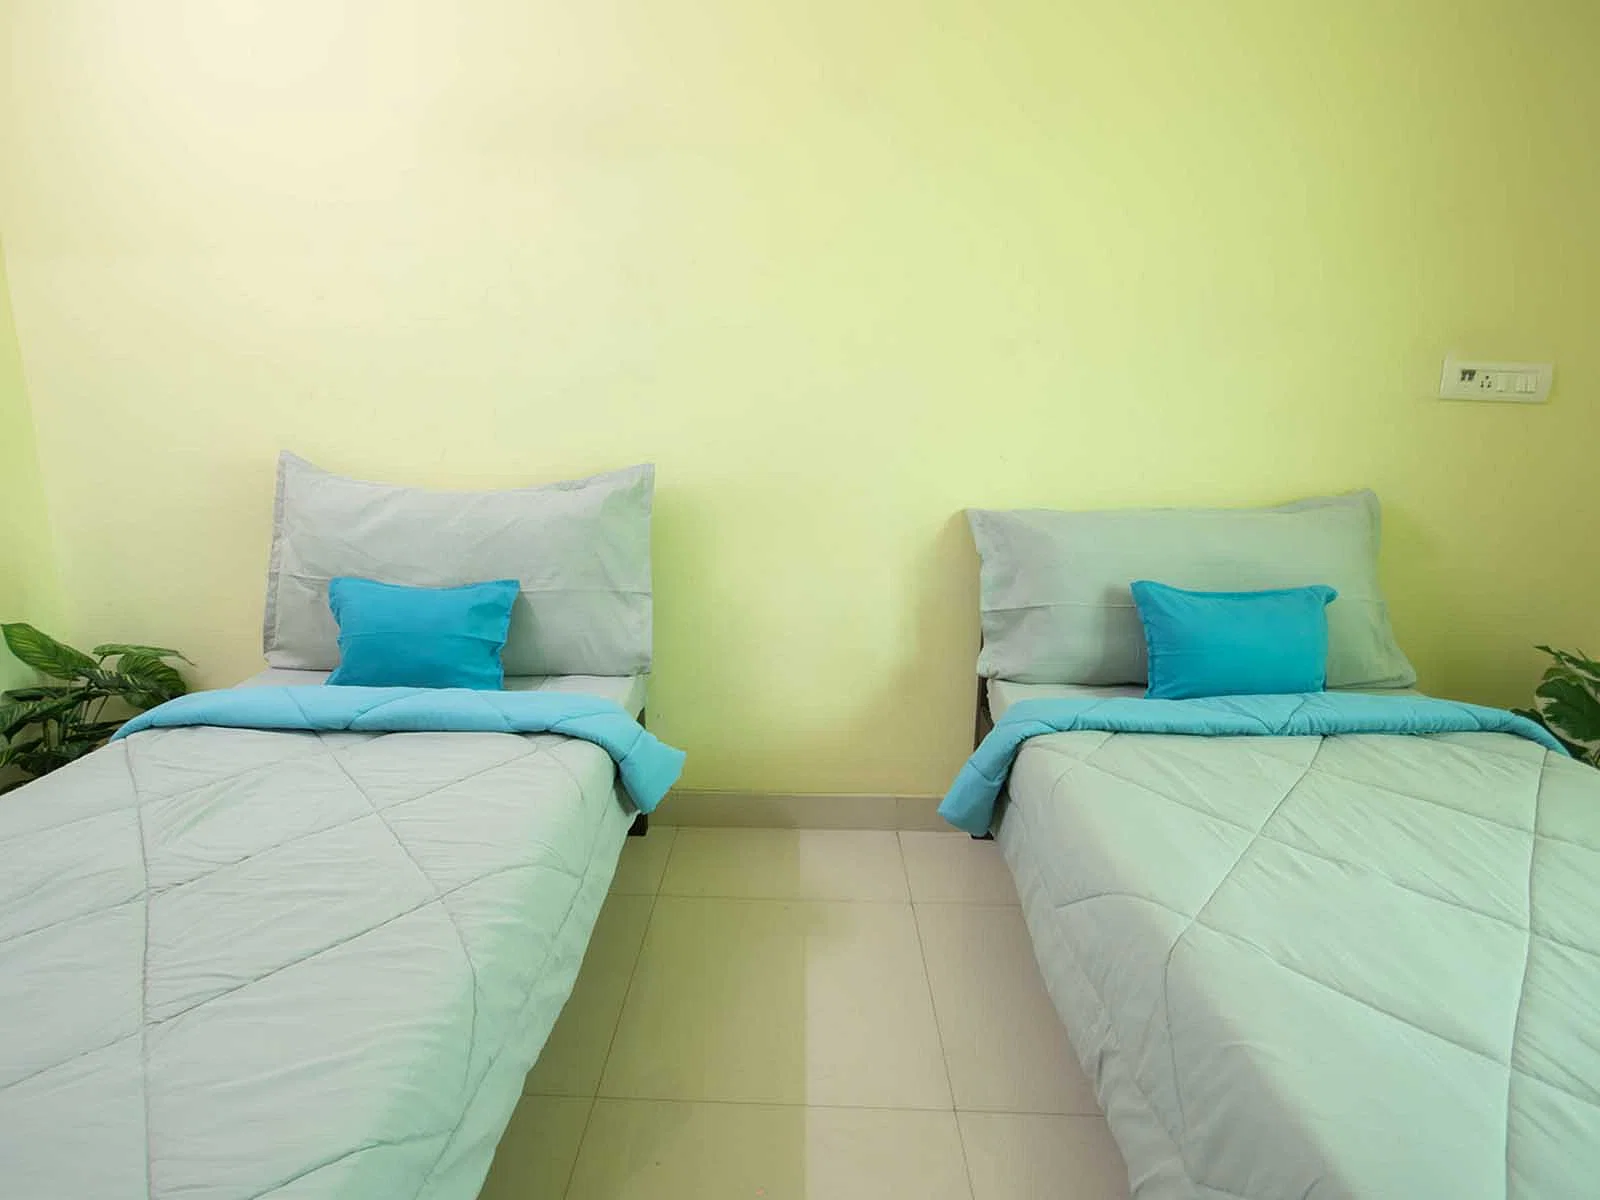 budget-friendly PGs and hostels for men with single rooms with daily hopusekeeping-Zolo Cruze